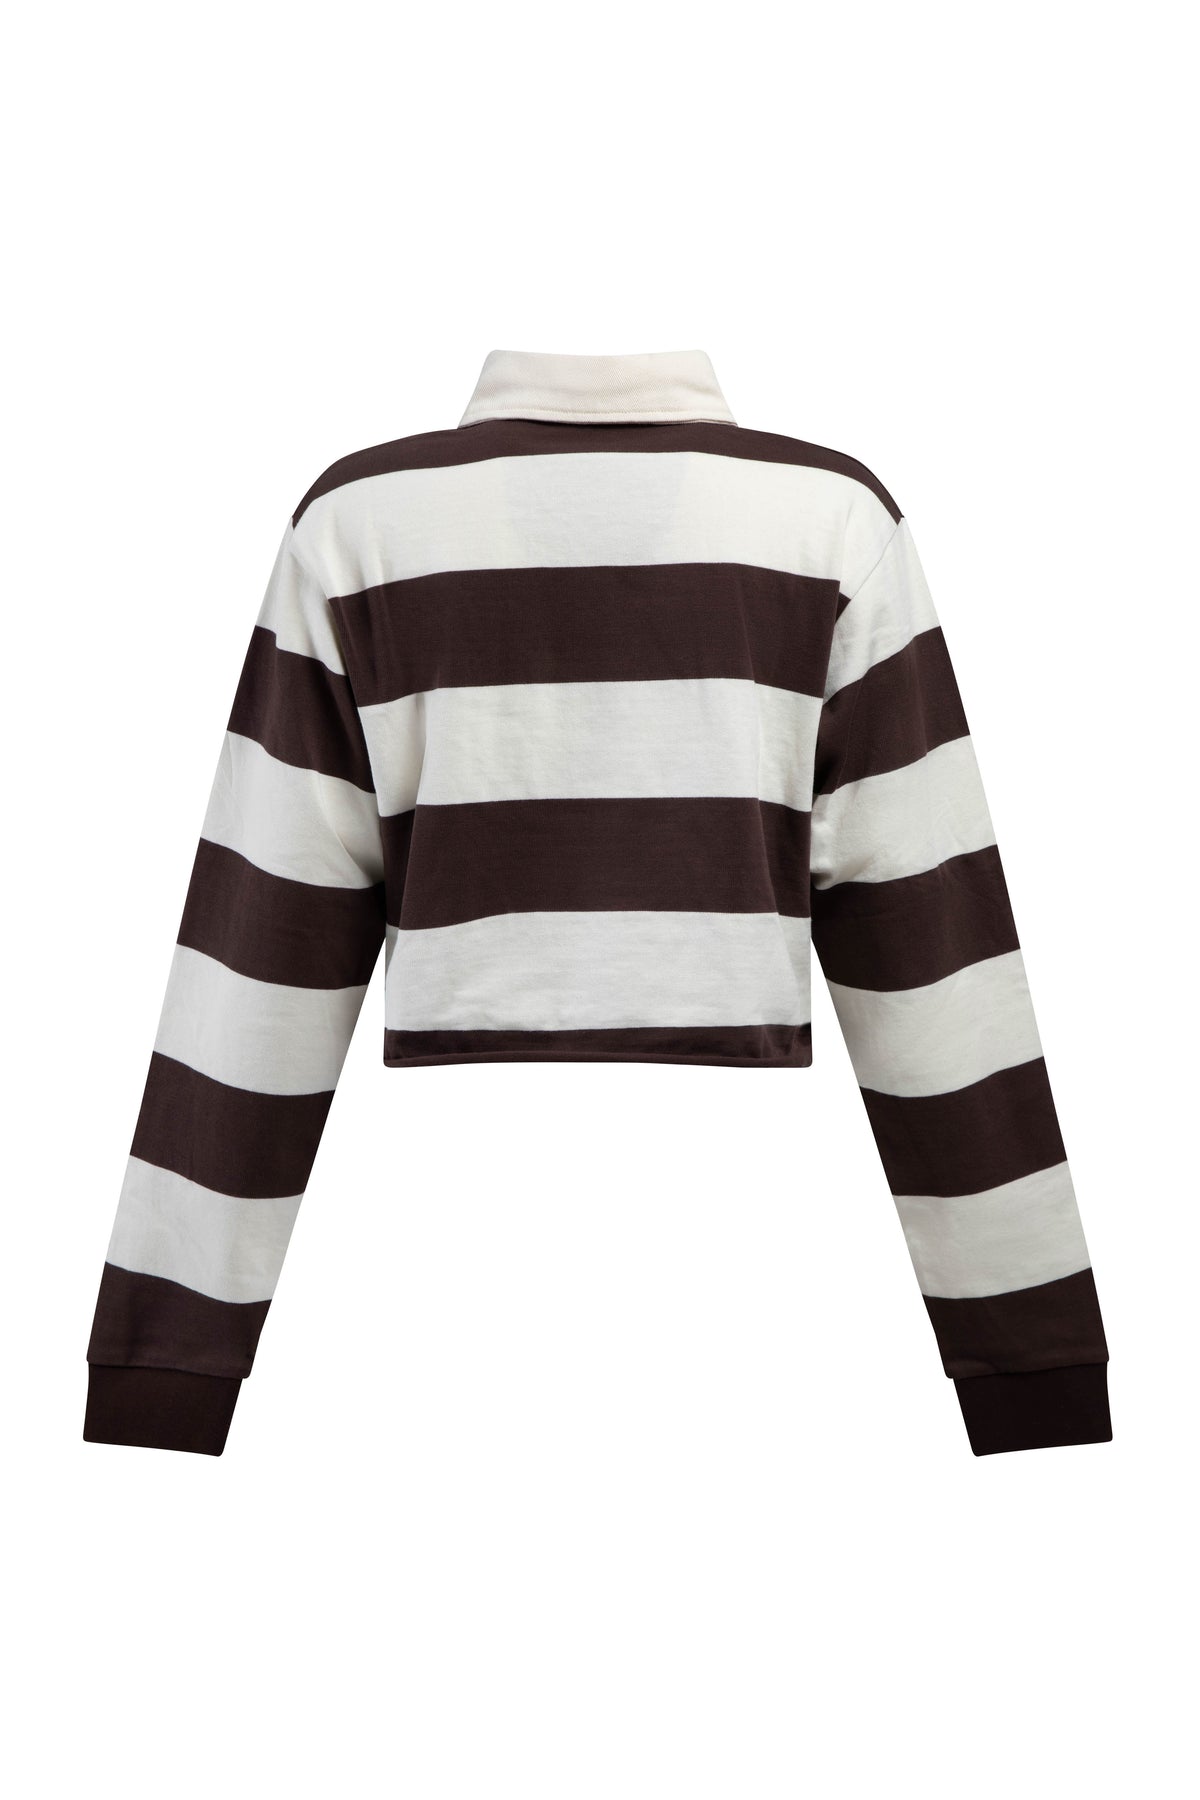 Lehigh University Rugby Top